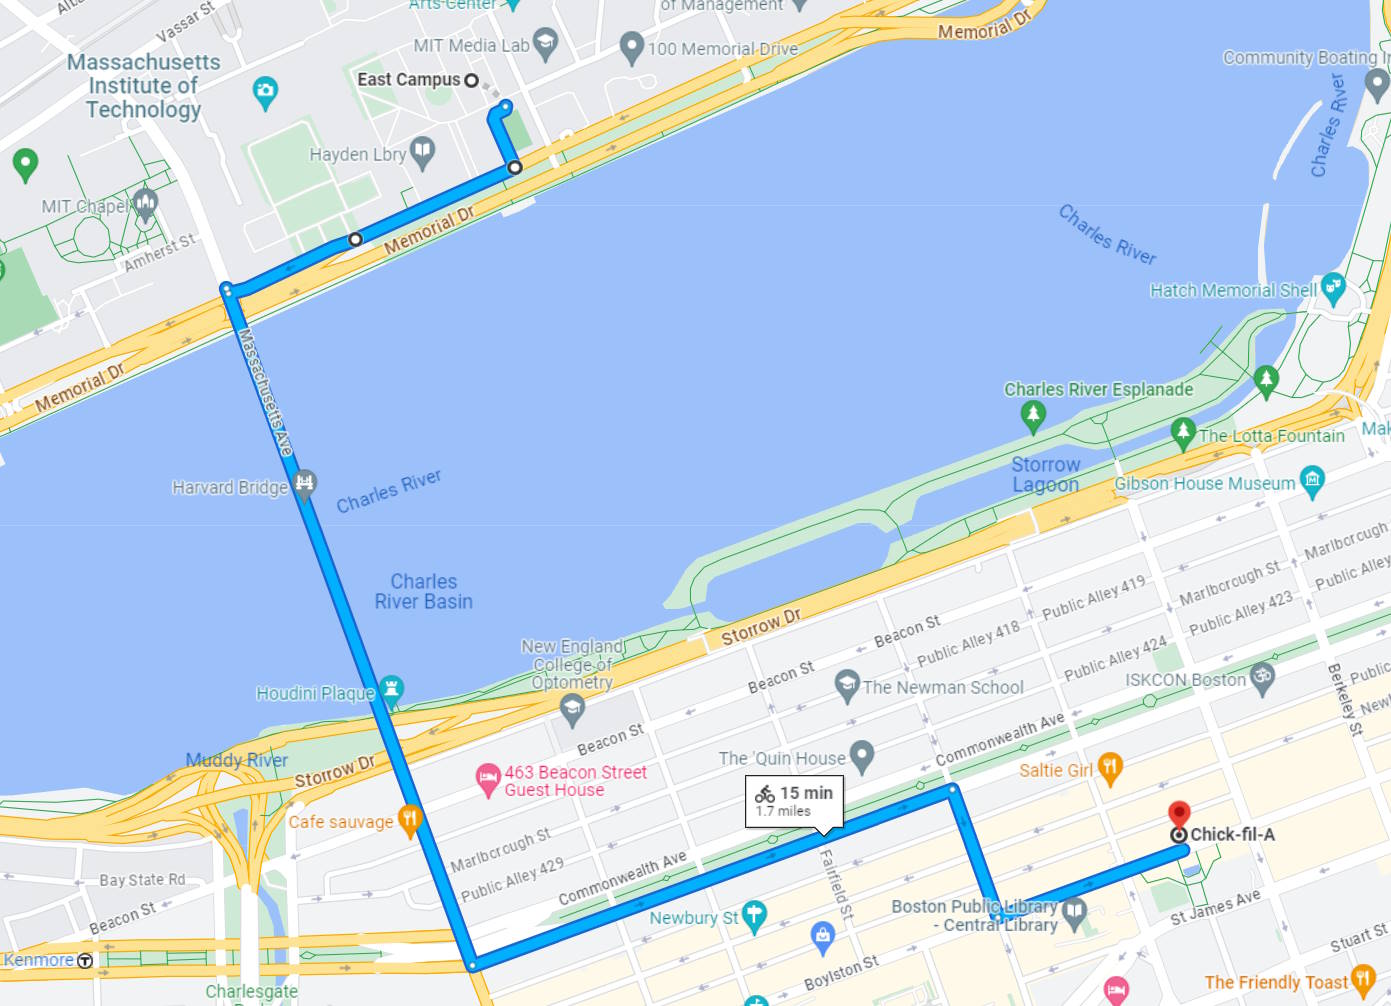 Google map screenshot showing the route from MIT's campus to the Chick-fil-A on Bolyston